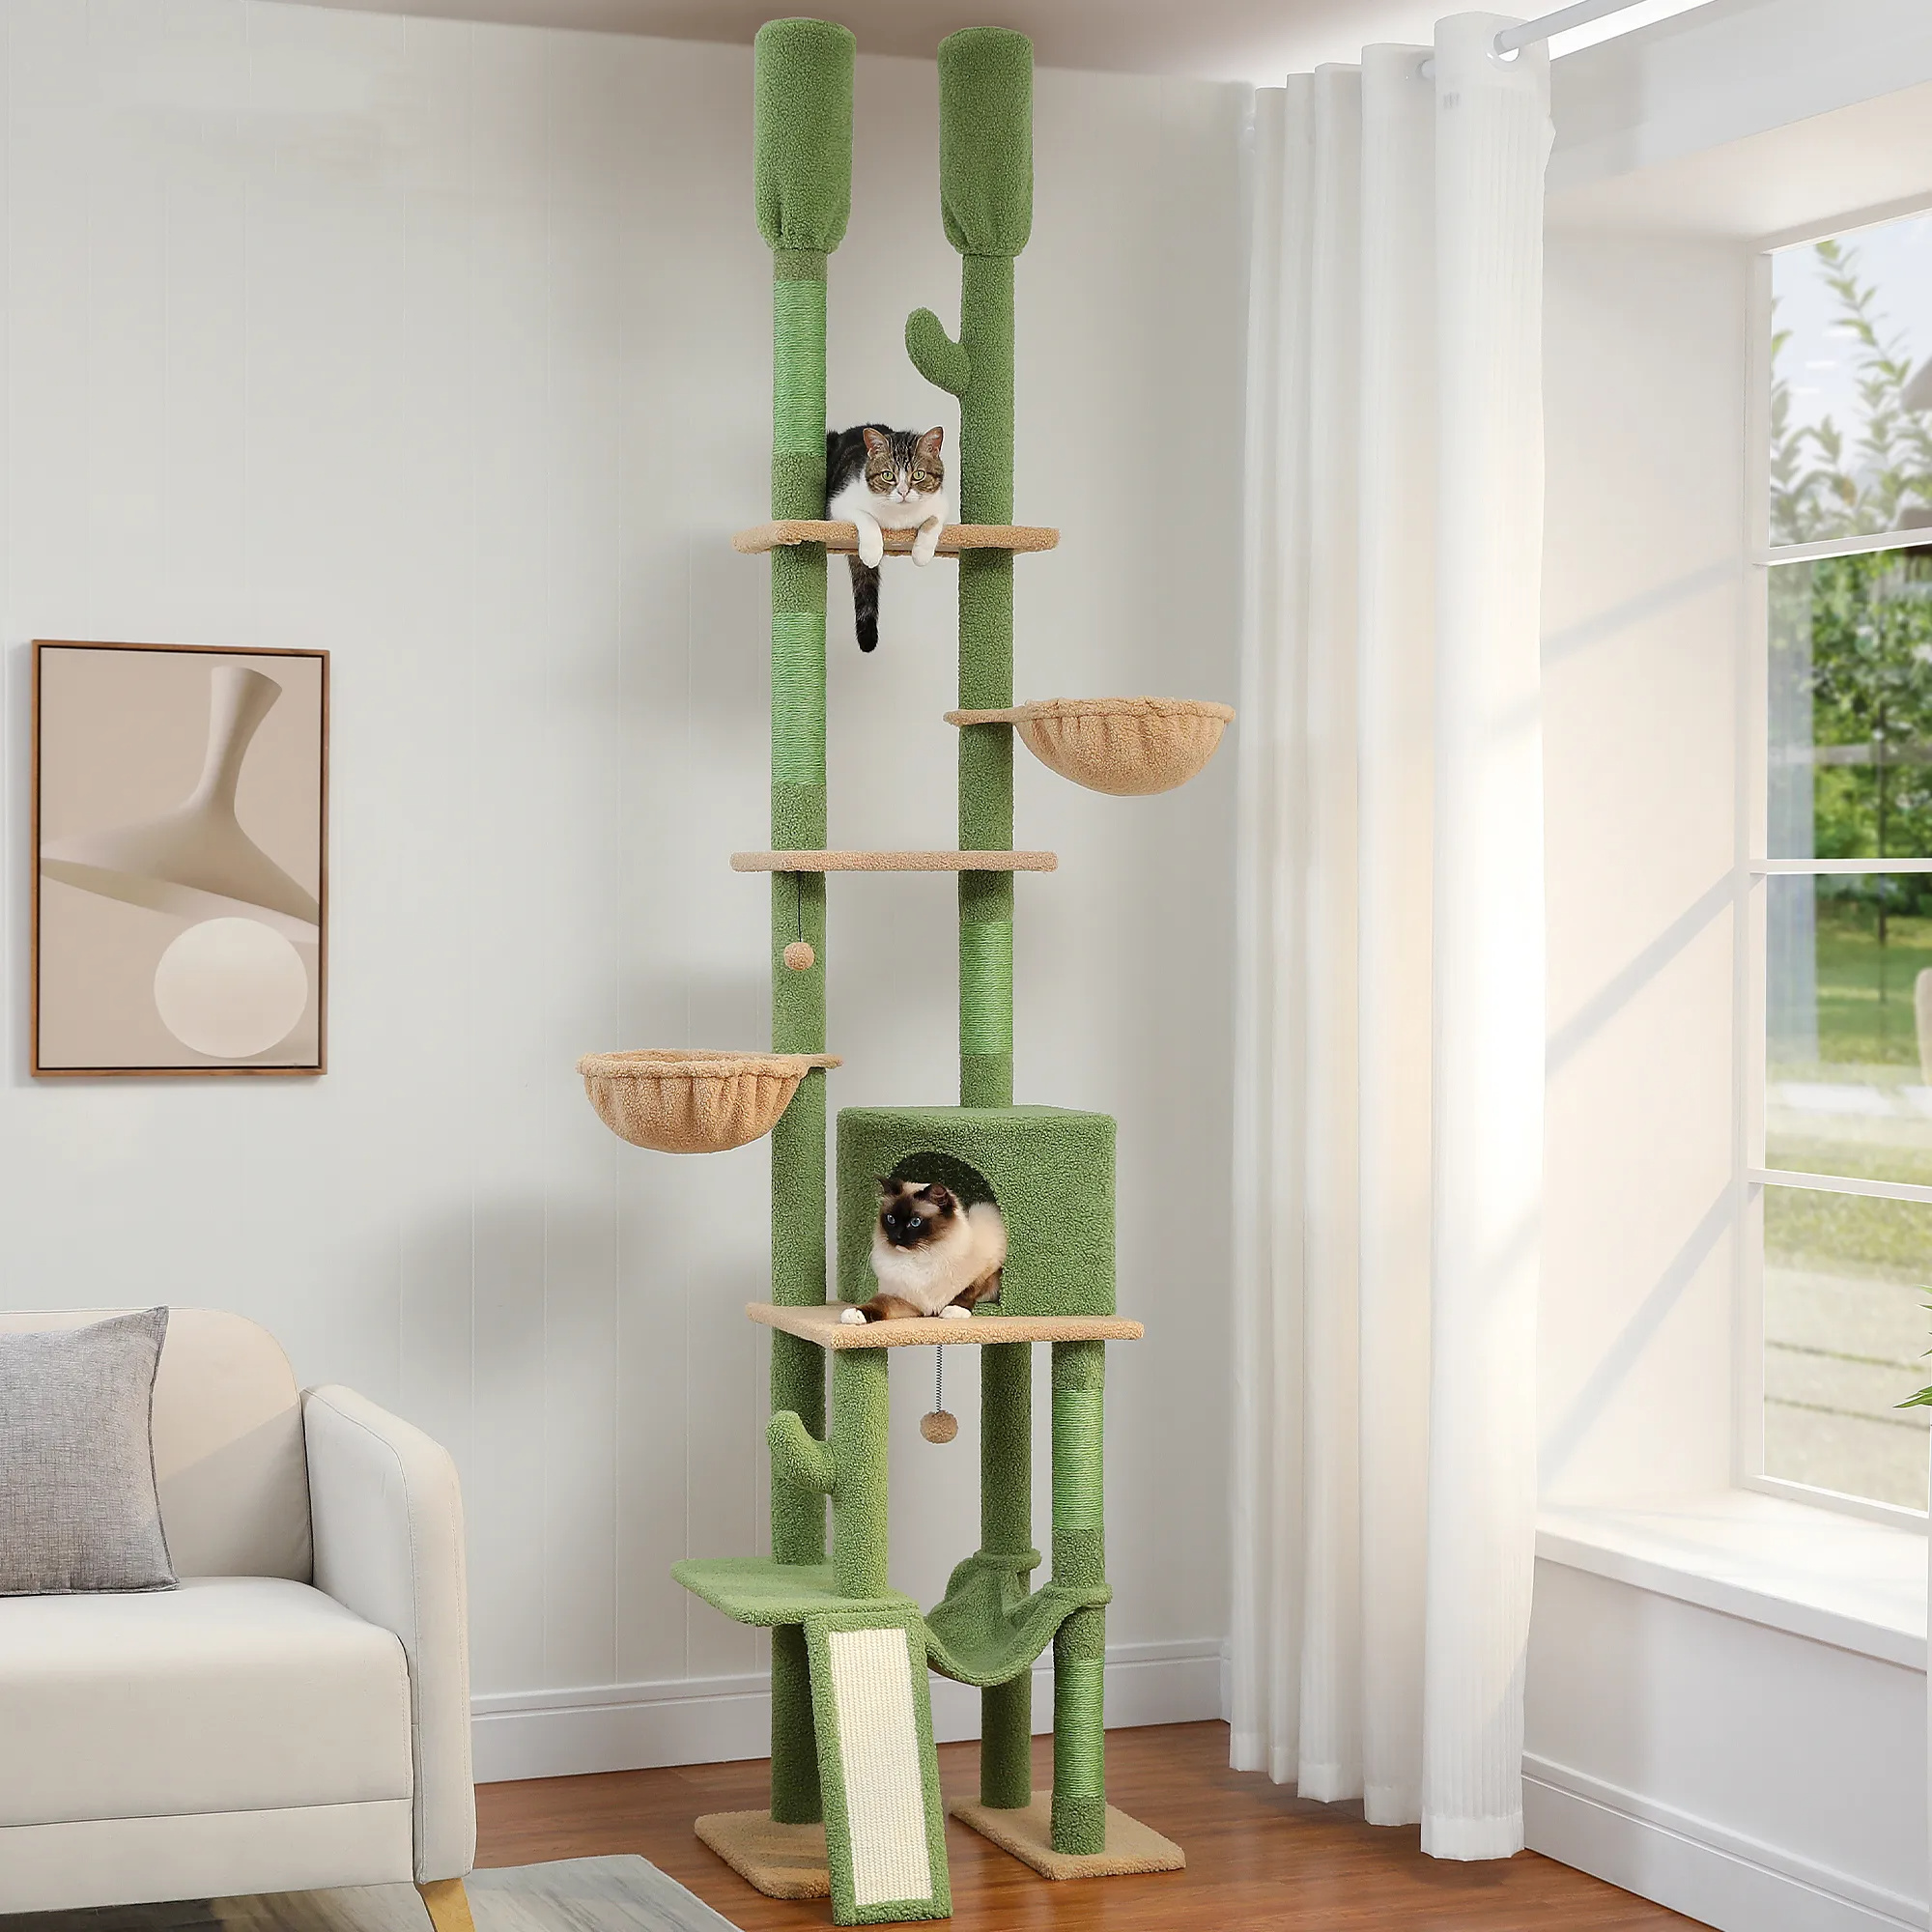 Cactus Cat Tree Floor to Ceiling Cat Tower with Adjustable Height 216-285CM 7 Tiers Climbing Tree with Cozy Hammocks and Condos